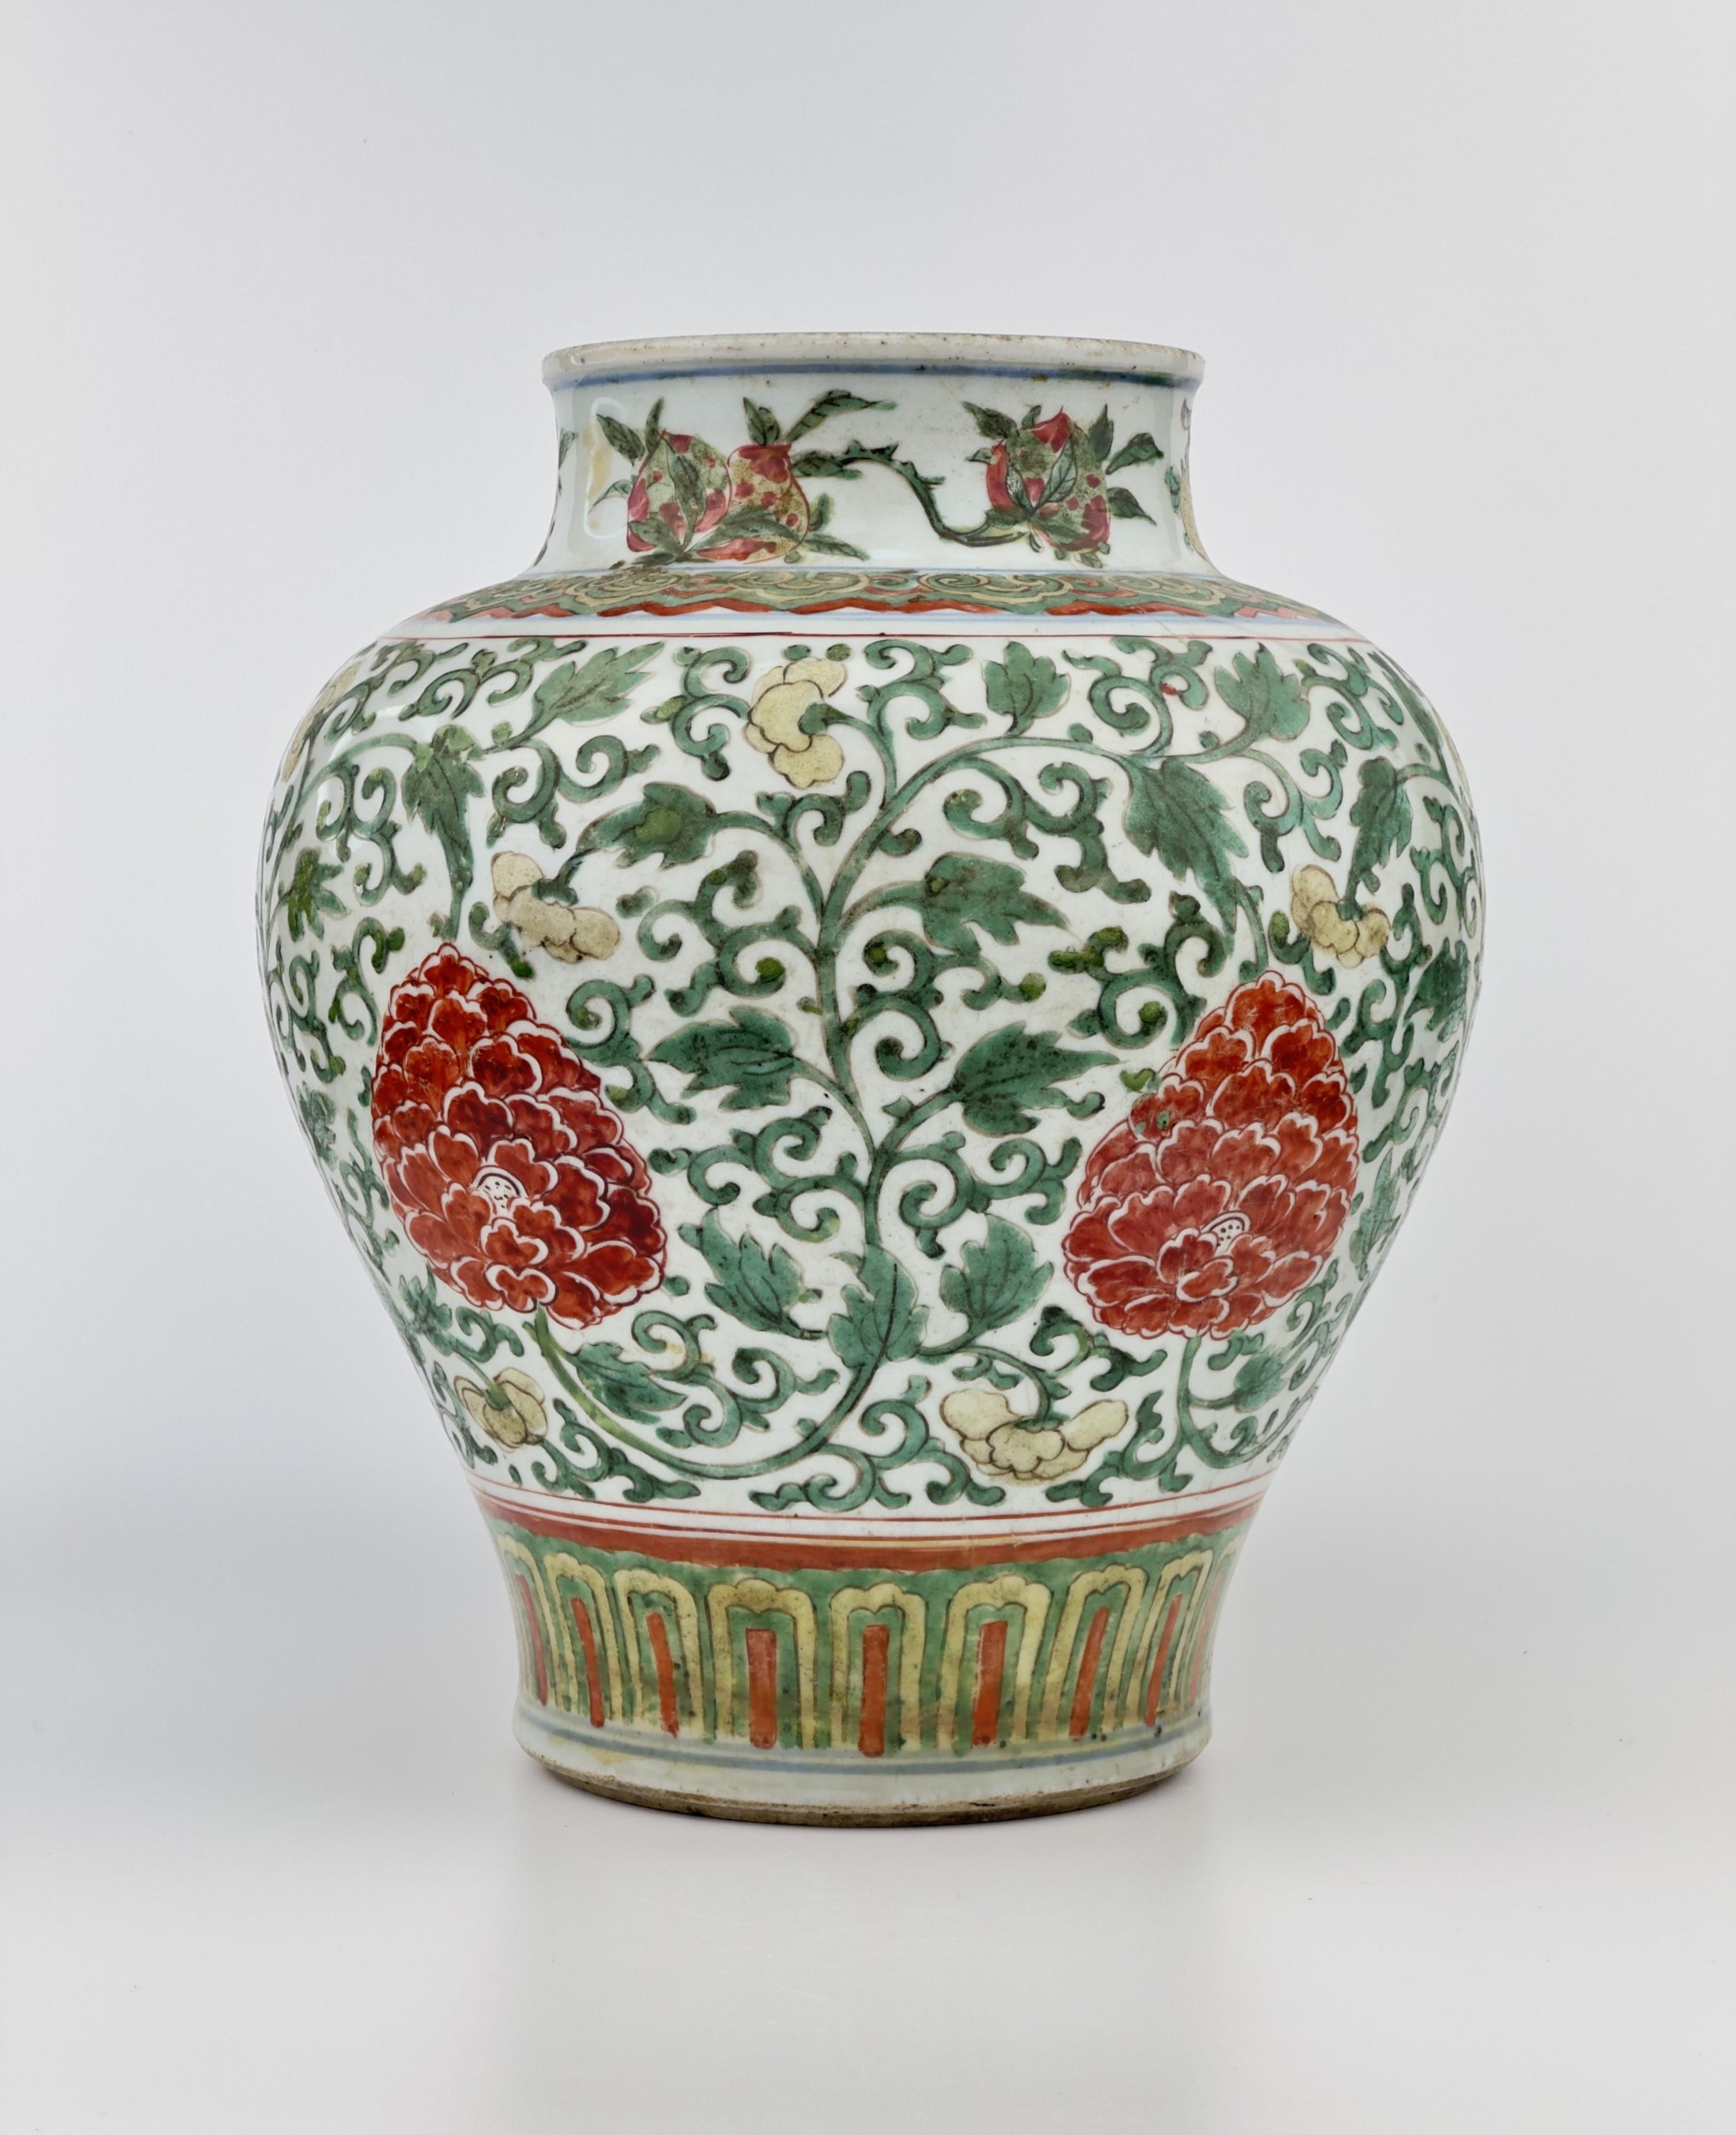 Glazed A Wucai 'Peony' Vase Transitional Period, 17th century, Early Qing Dynasty For Sale